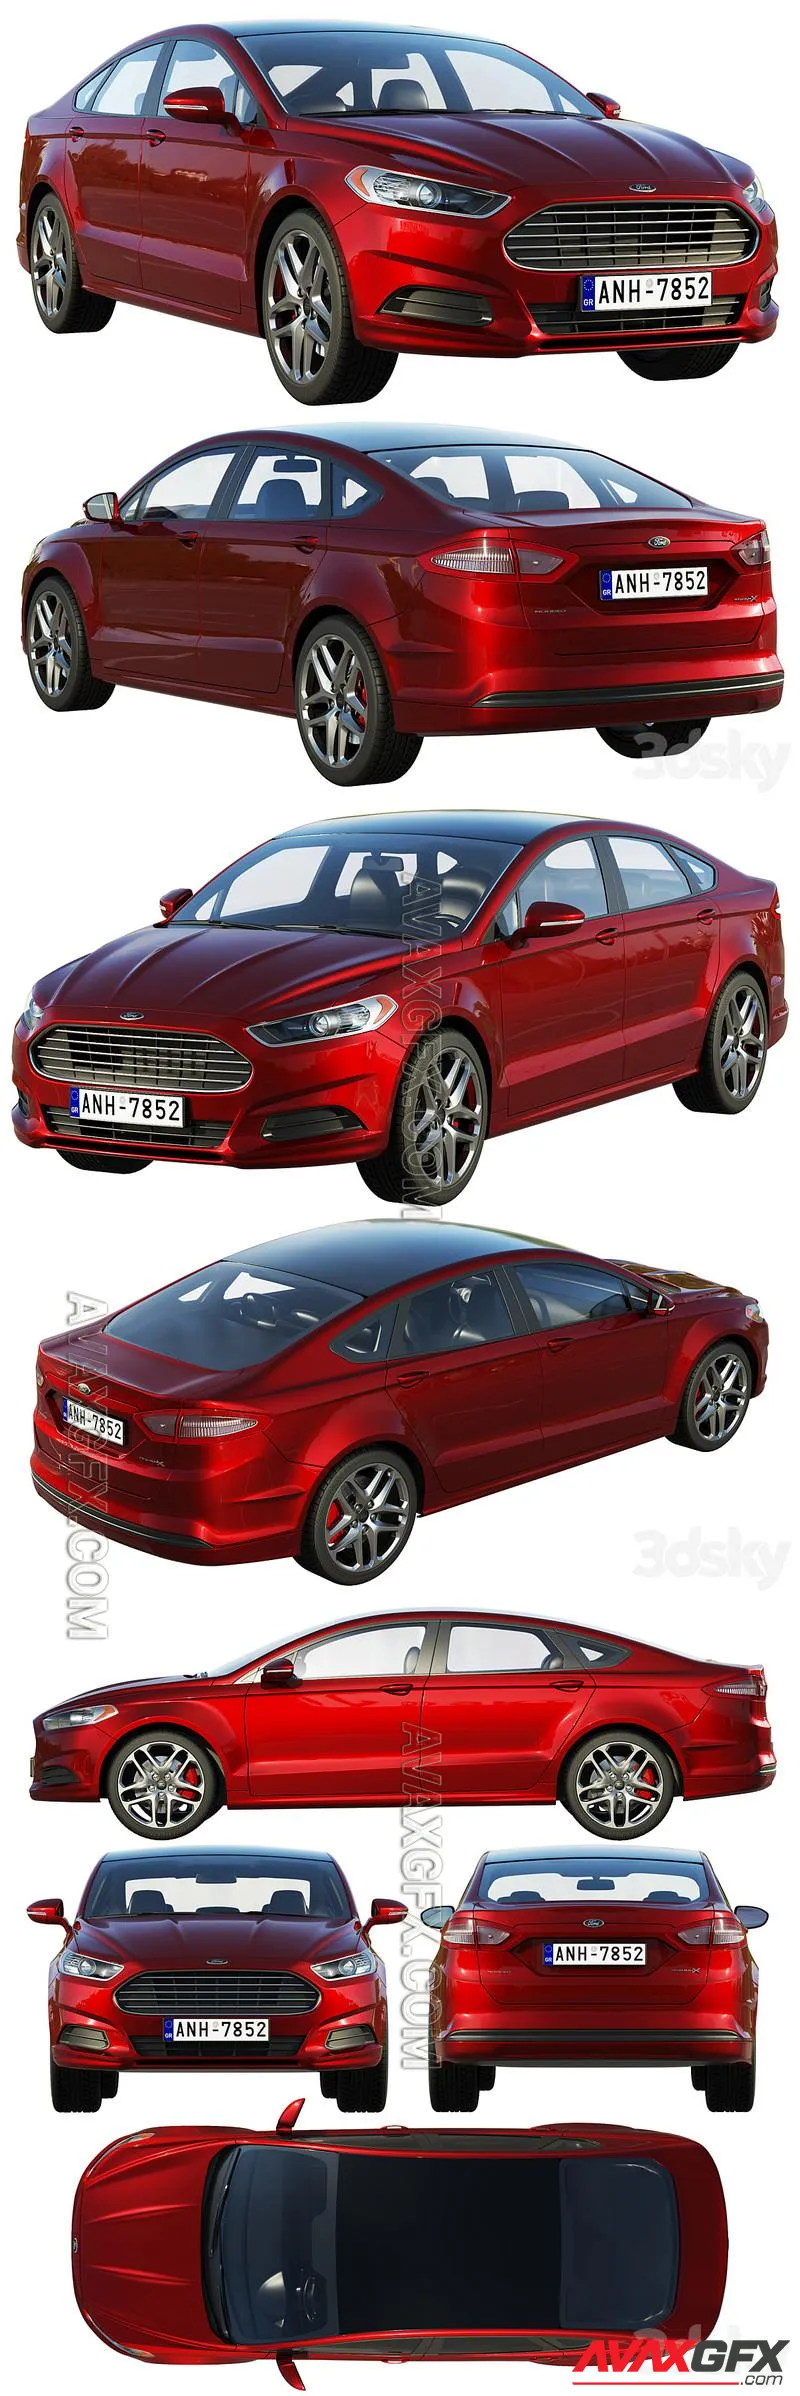 Ford Mondeo Ford Fusion - 3D Model